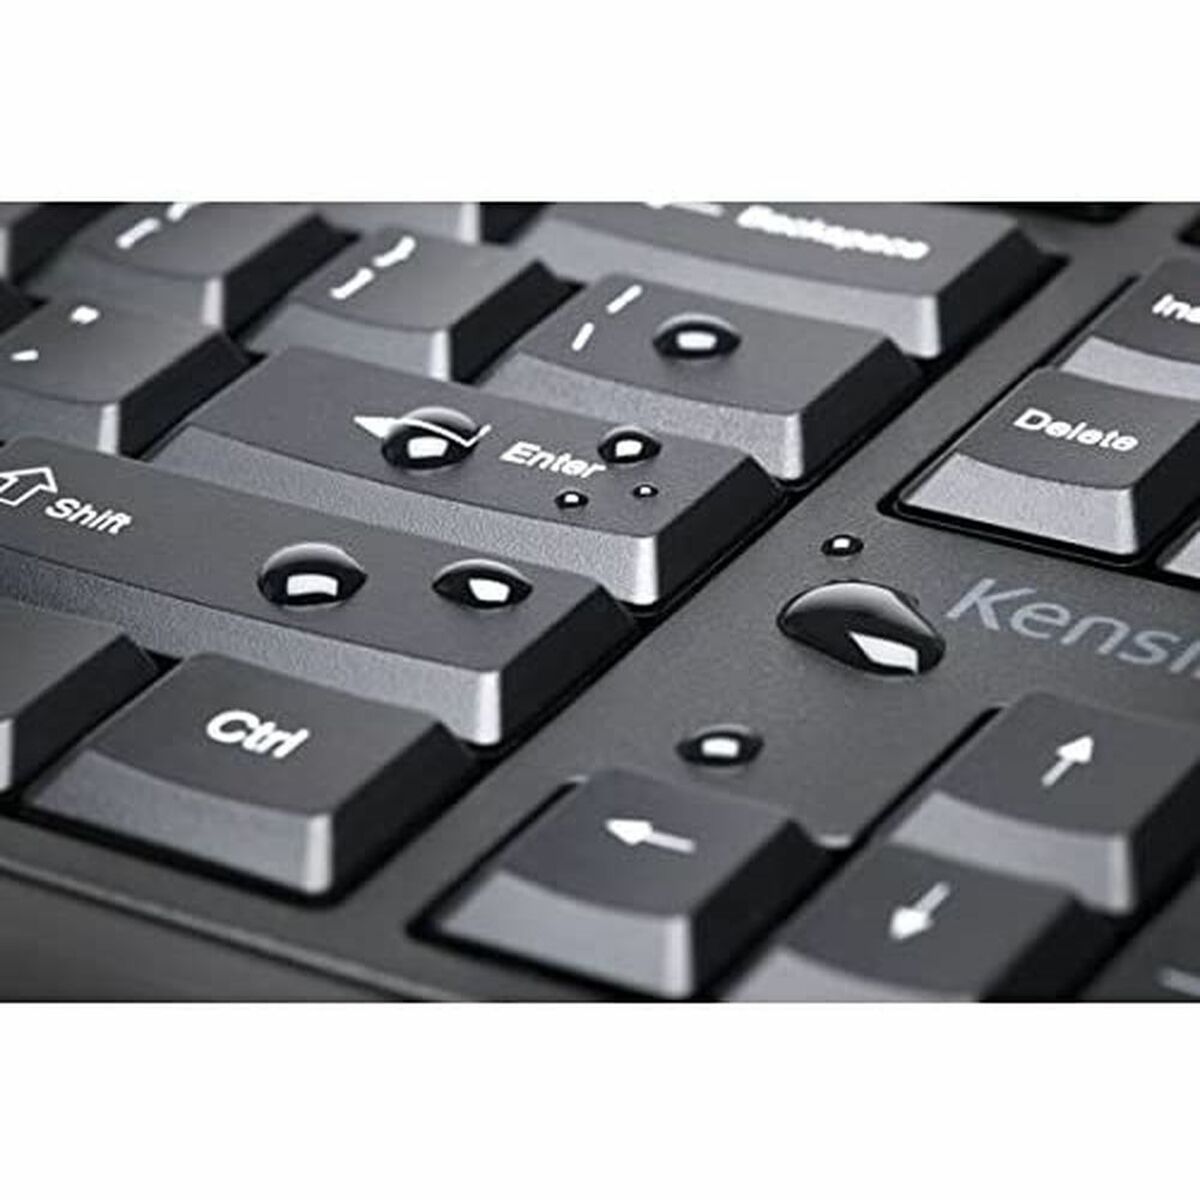 Keyboard and Wireless Mouse Kensington K75230ES Black Spanish Spanish Qwerty QWERTY, Kensington, Computing, Accessories, keyboard-and-wireless-mouse-kensington-k75230es-black-spanish-spanish-qwerty-qwerty, :QWERTY, :Spanish, Brand_Kensington, category-reference-2609, category-reference-2642, category-reference-2646, category-reference-t-19685, category-reference-t-19908, category-reference-t-21353, computers / peripherals, Condition_NEW, office, Price_50 - 100, Teleworking, RiotNook